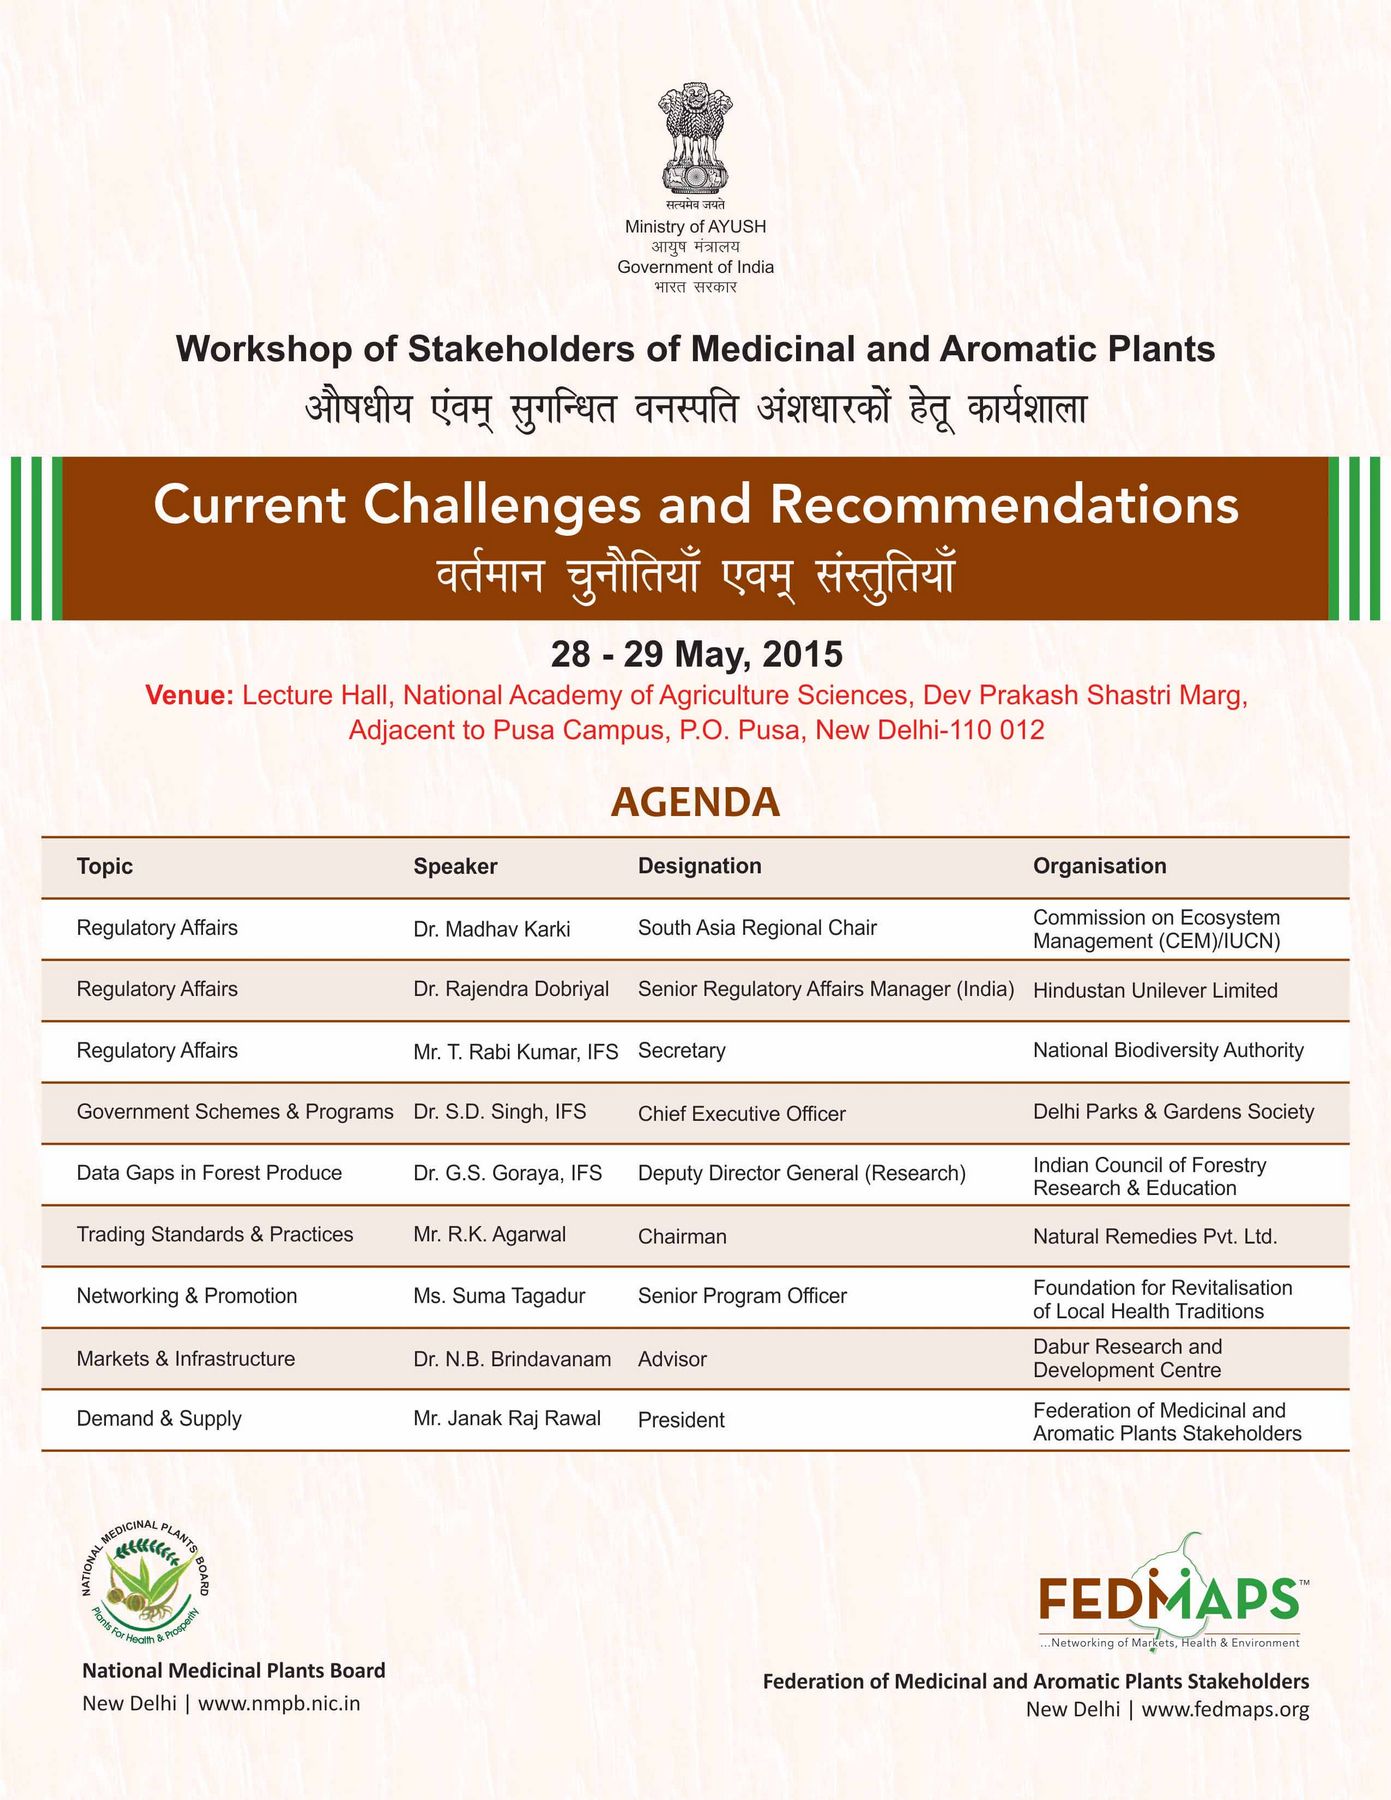 Workshop on Stakeholders of Armoatic Medicinal Plants